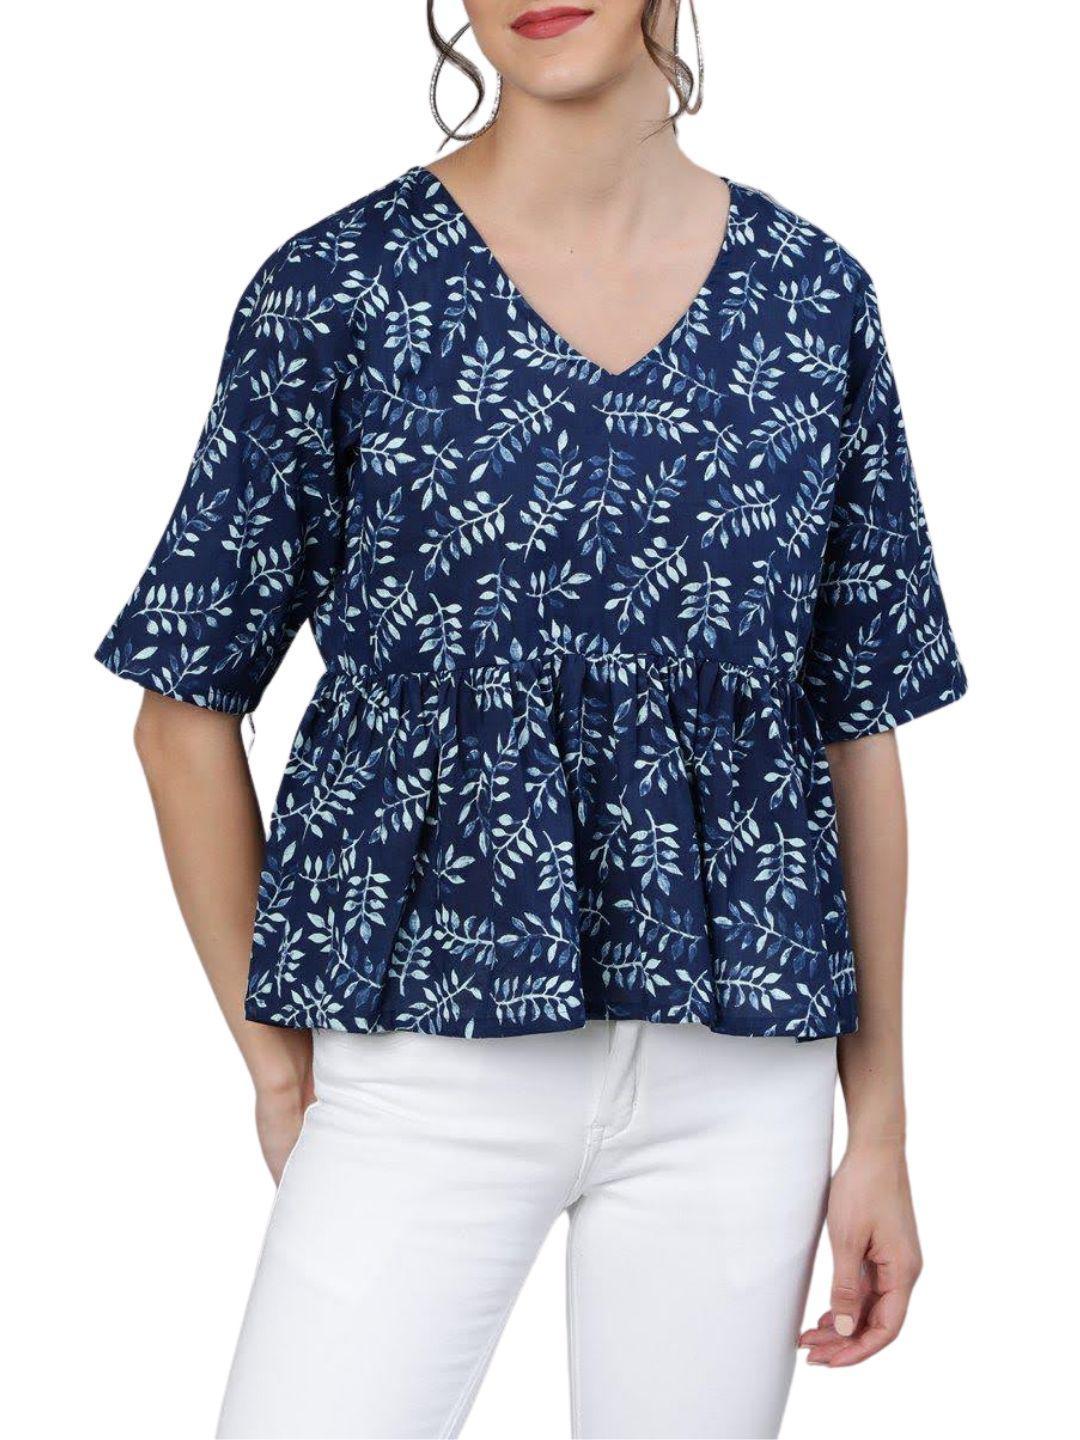 navy-blue-white-floral-printed-pure-cotton-top-10207114BL, Women Clothing, Cotton Top